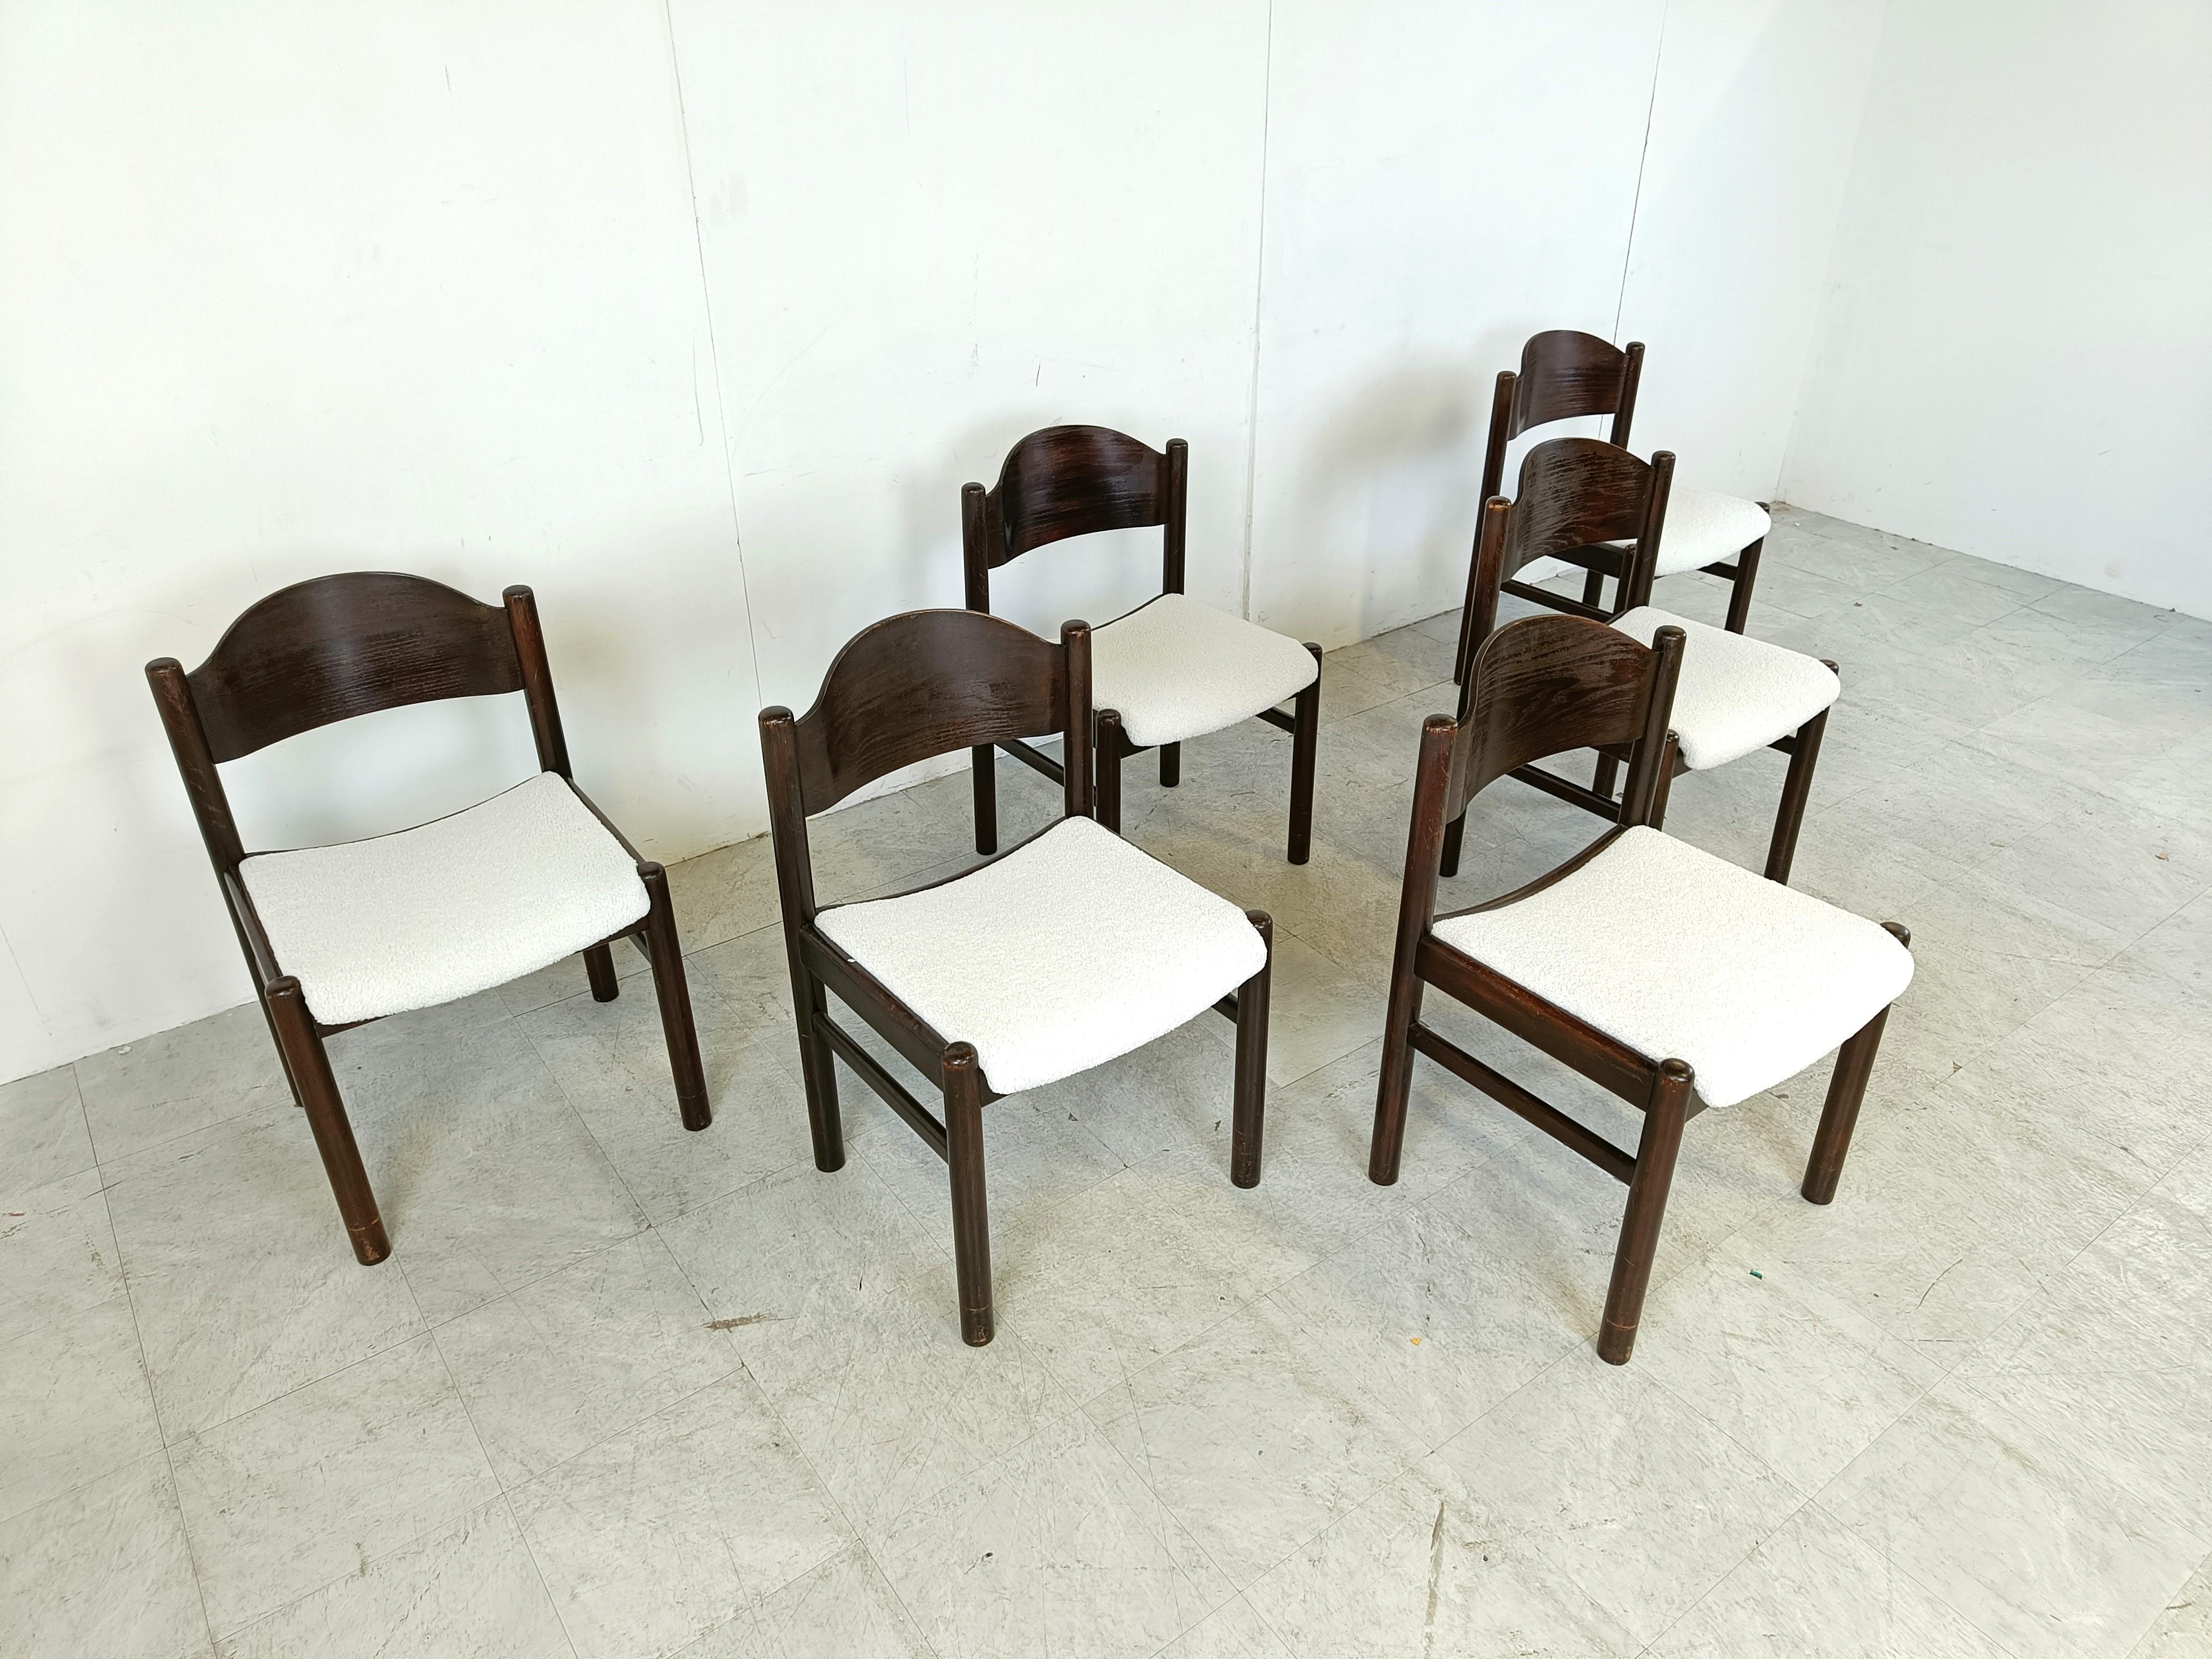 Vintage brutalist dining chairs, set of 6 - 1960s 2